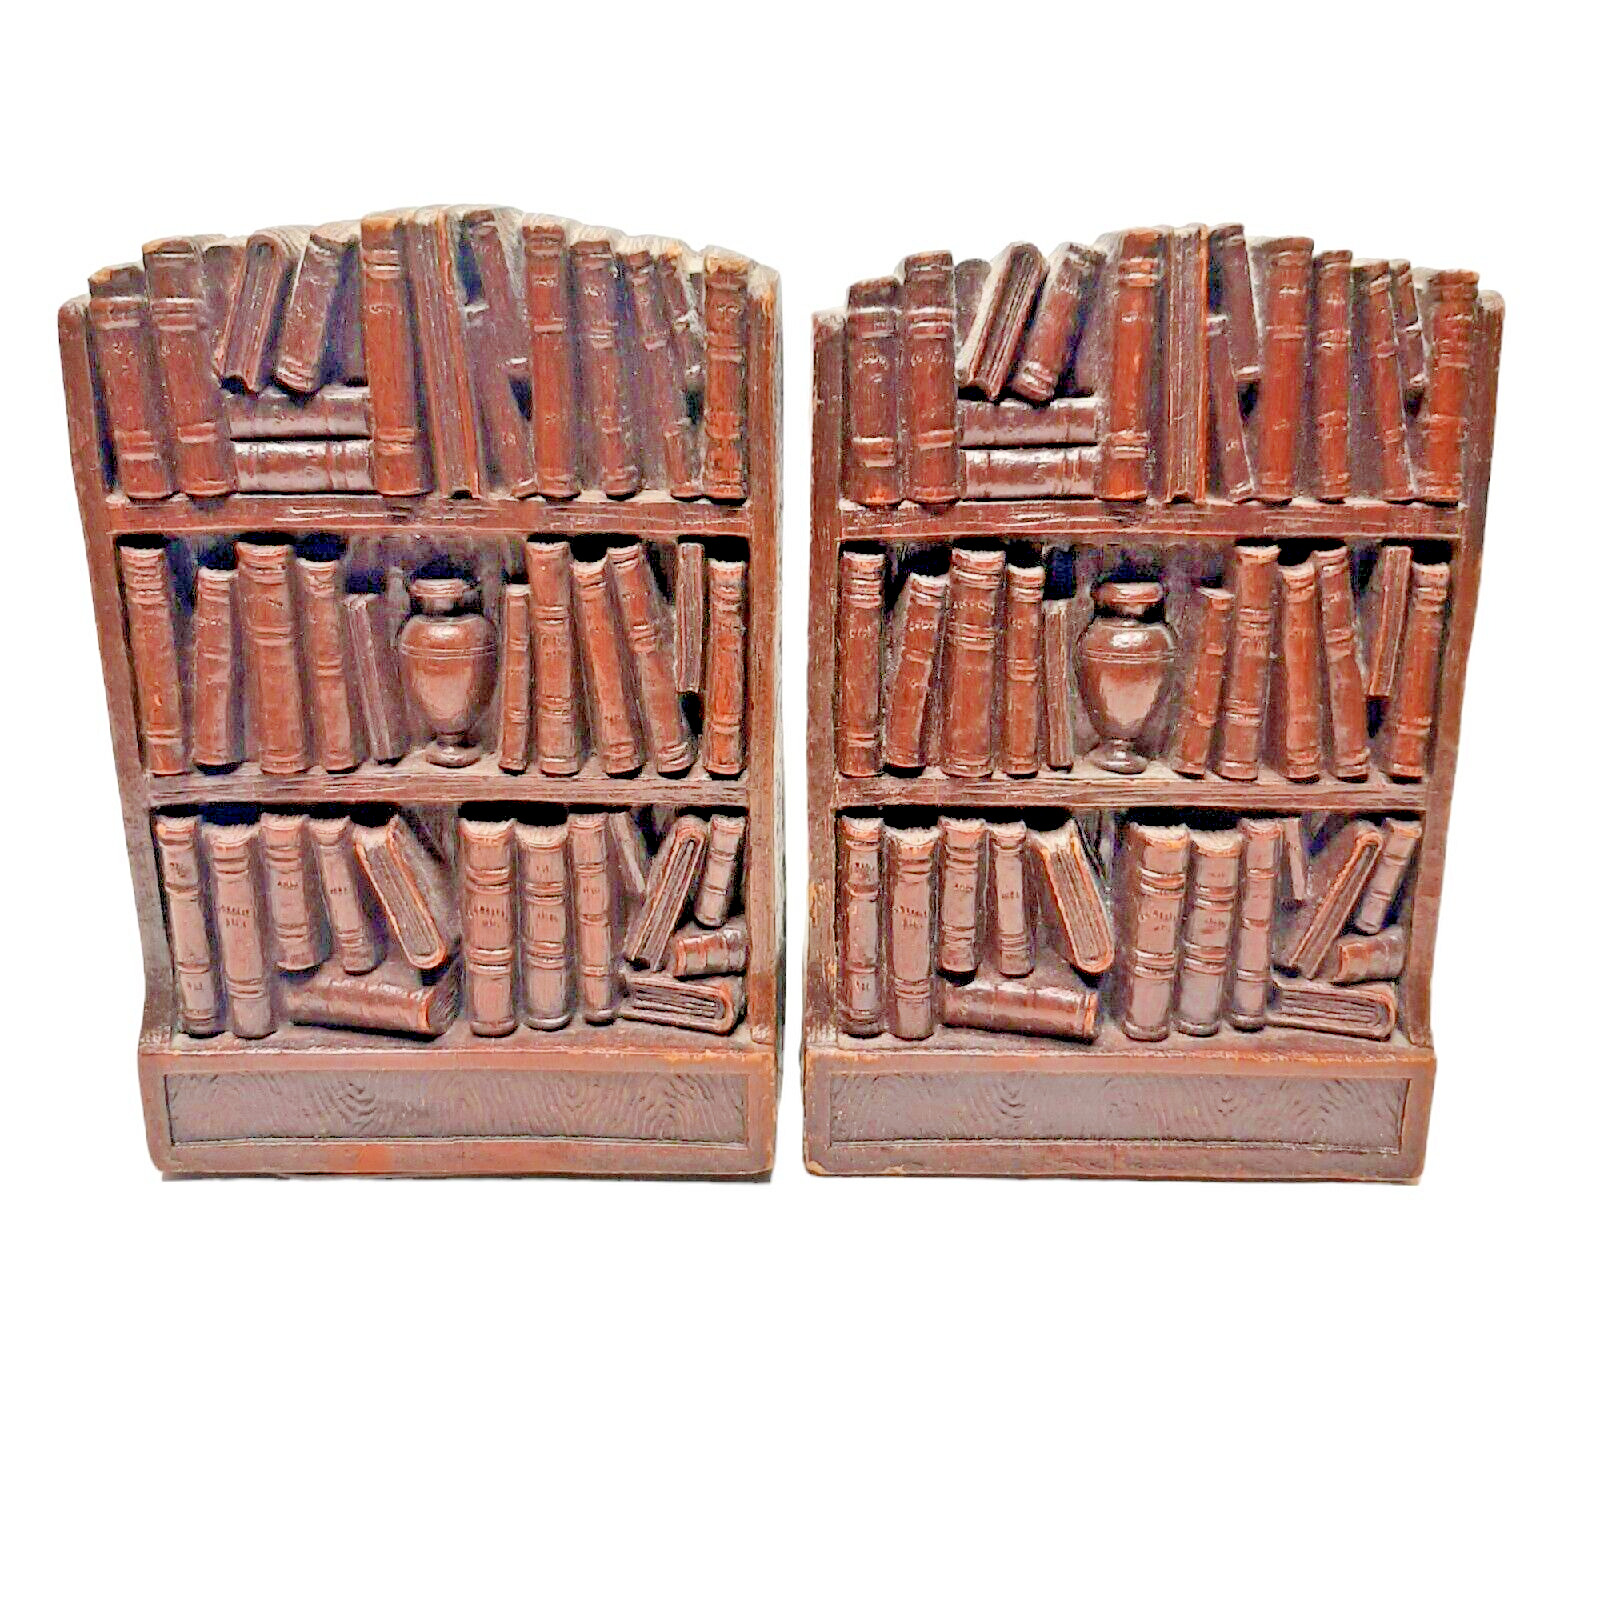 Vtg 50s Bookshelf Bookends Syroco Wood USA Library MCM Decor Book Spines Shaped